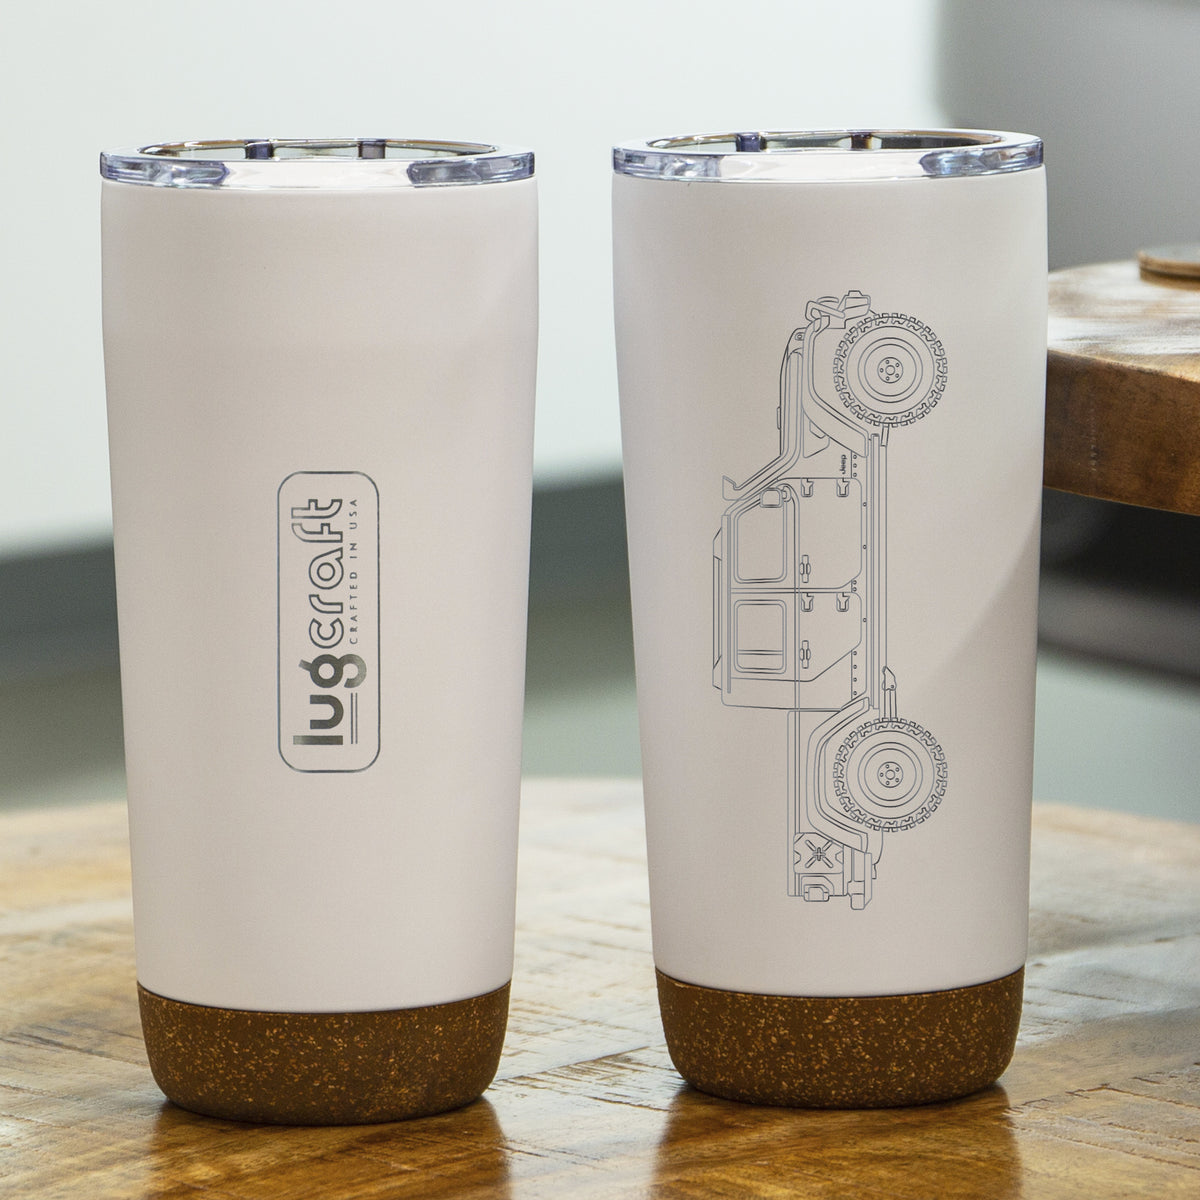 Jeep Gladiator Insulated Stainless Steel Coffee Tumbler - 20 oz